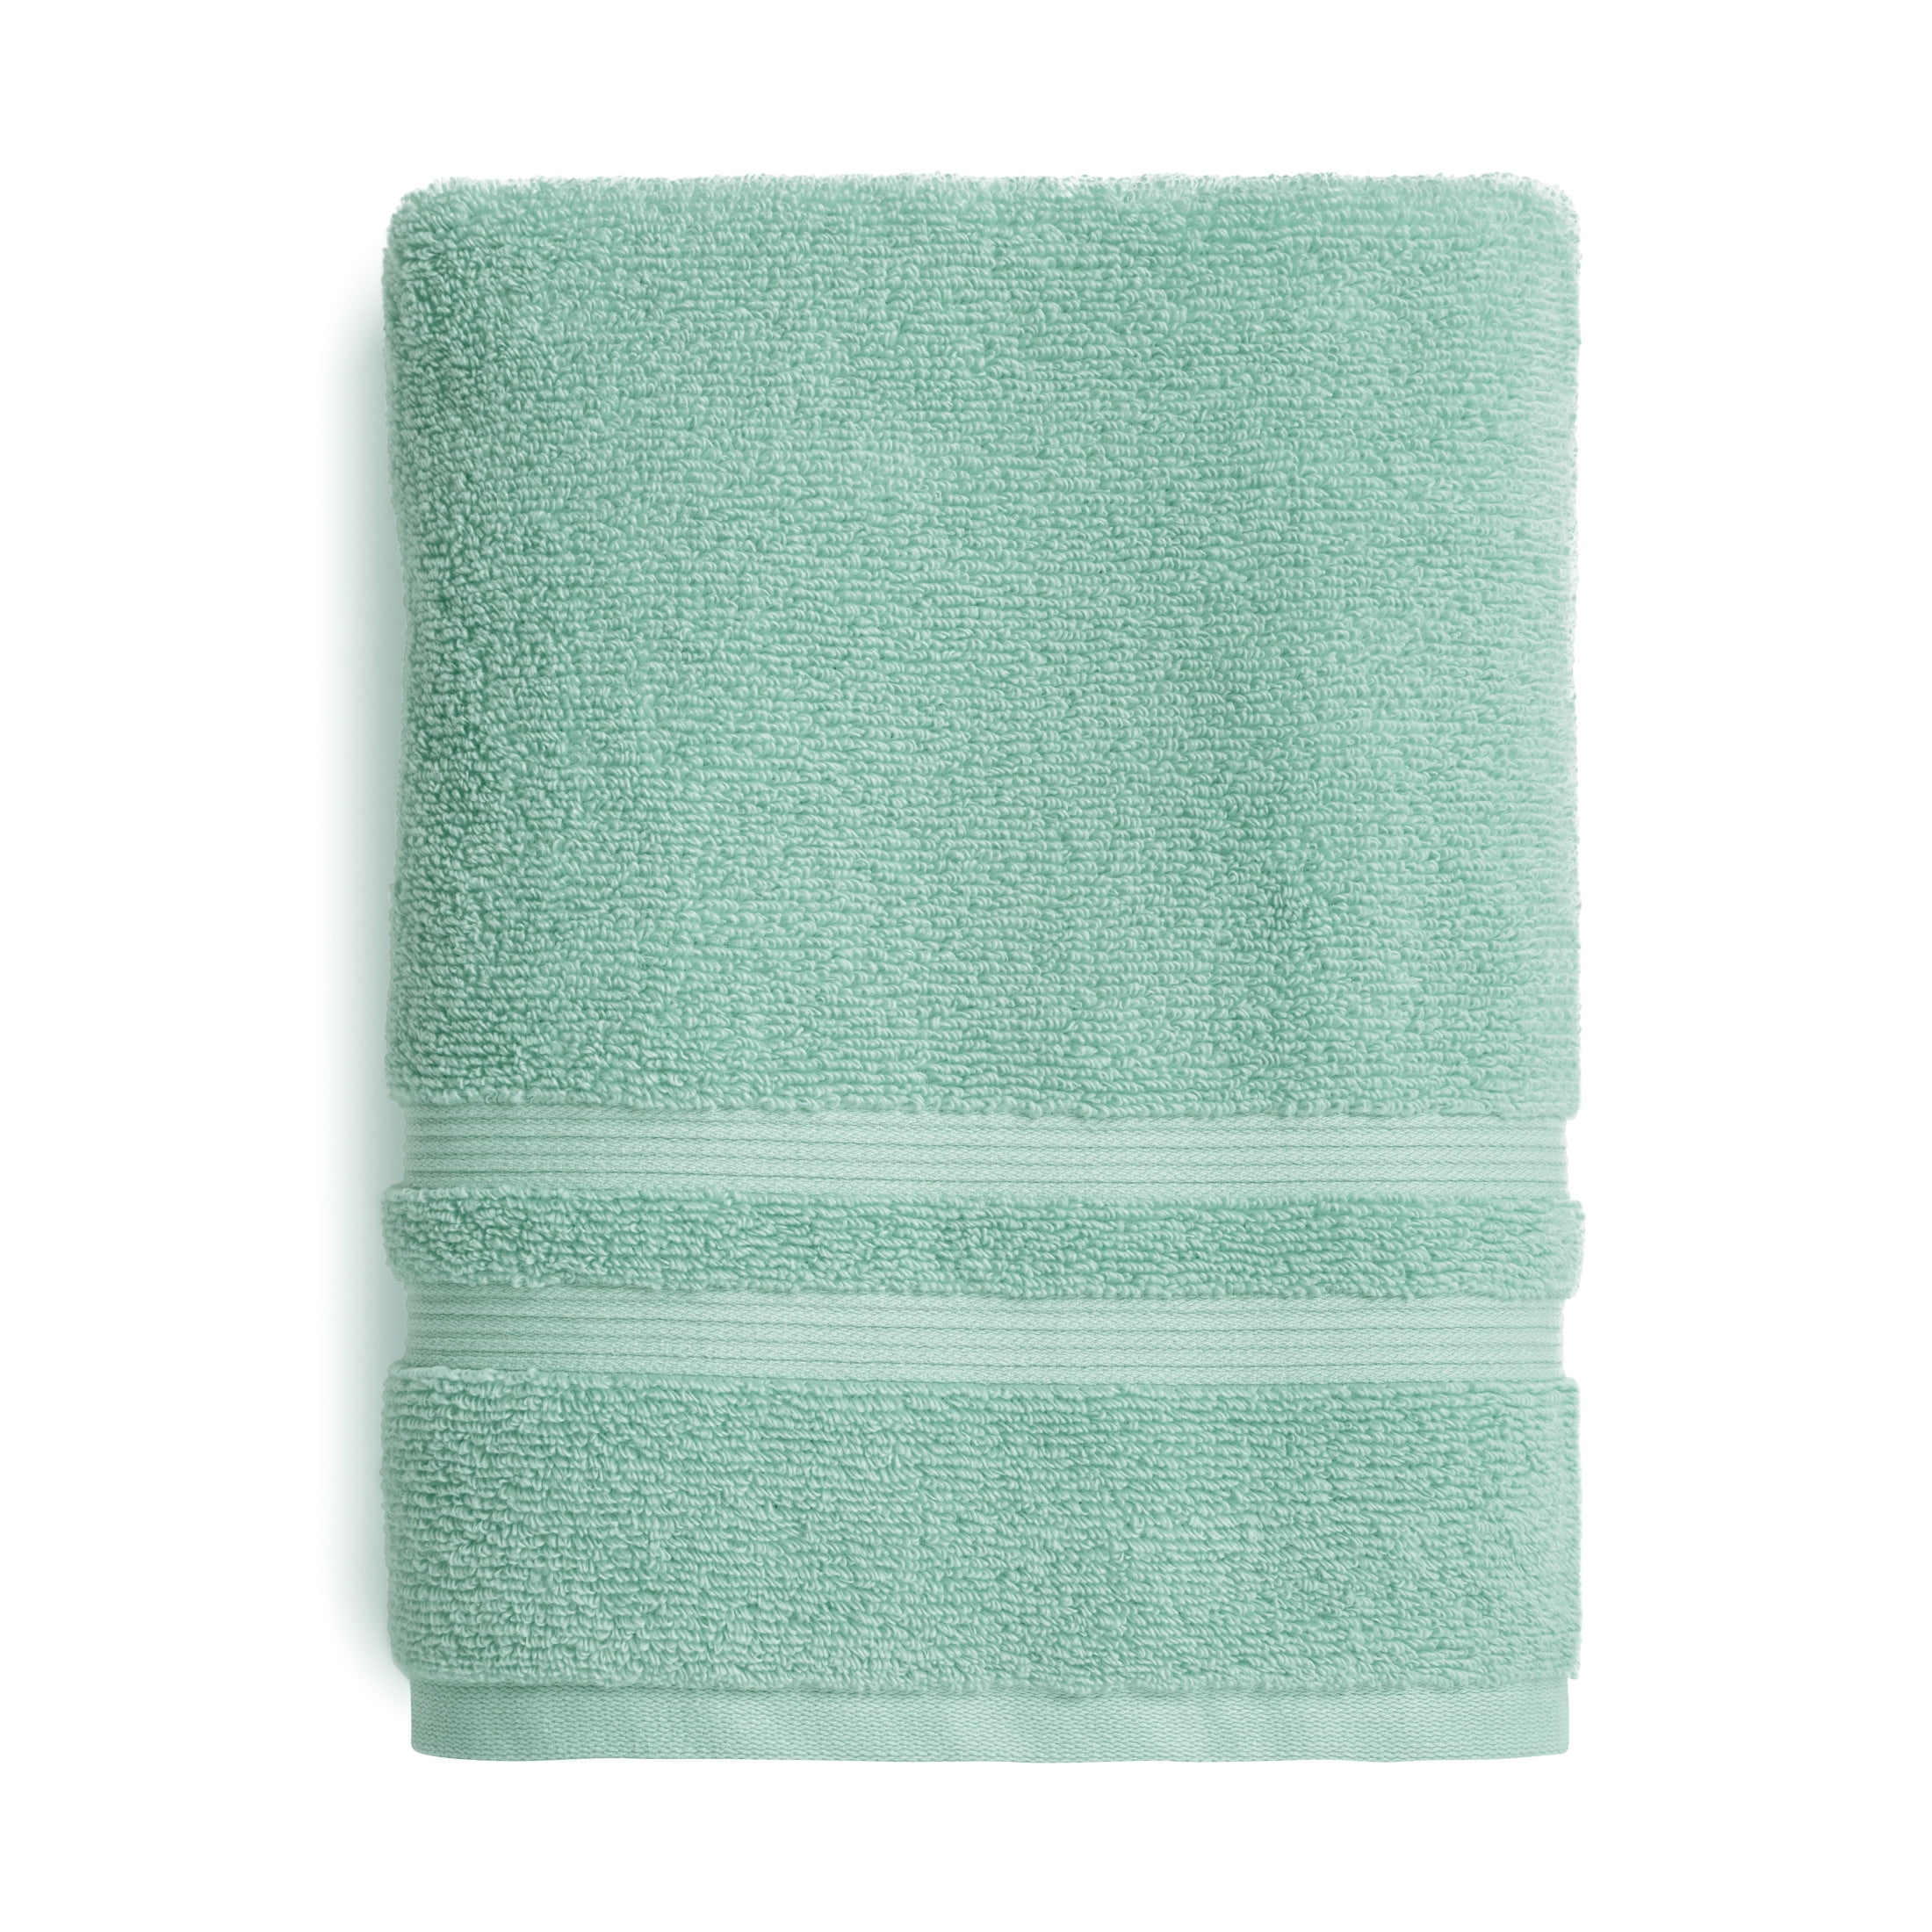 Tens Towels Large Bath Towels, 100% Cotton Towels, 30 x 60 Inches, Extra  Large B